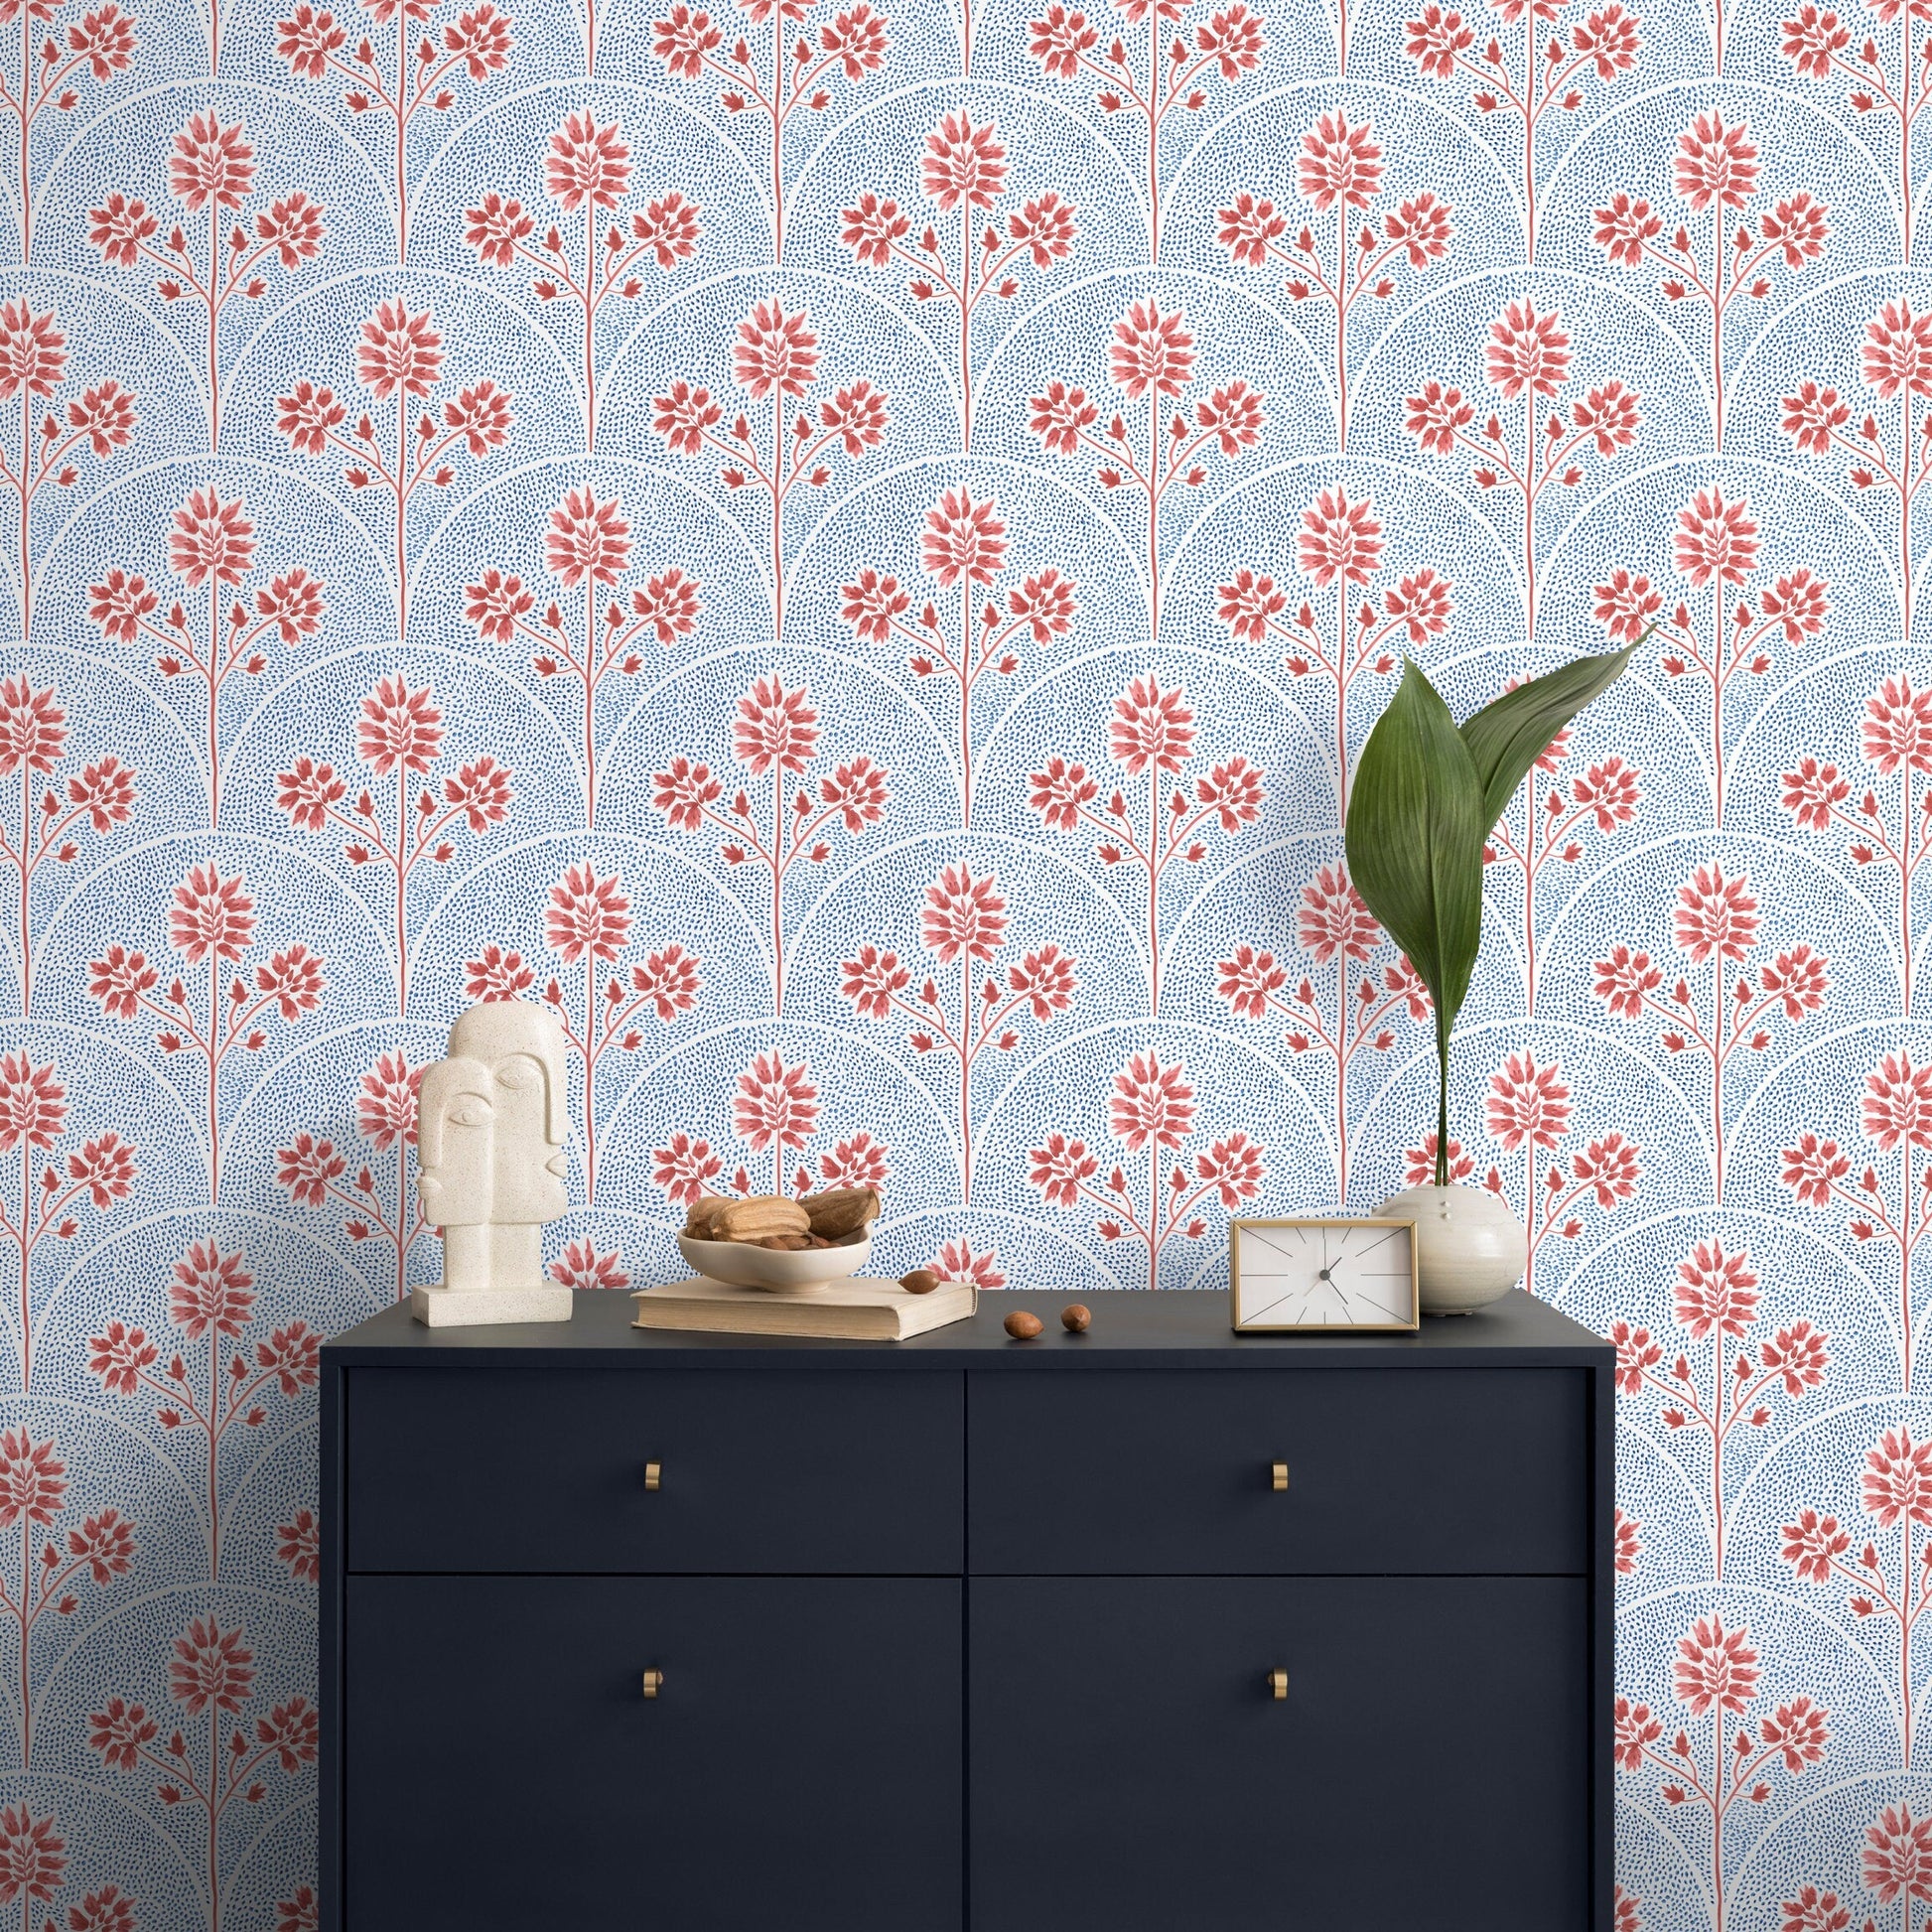 Pink and Blue Floral Wallpaper / Peel and Stick Wallpaper Removable Wallpaper Home Decor Wall Art Wall Decor Room Decor - C779